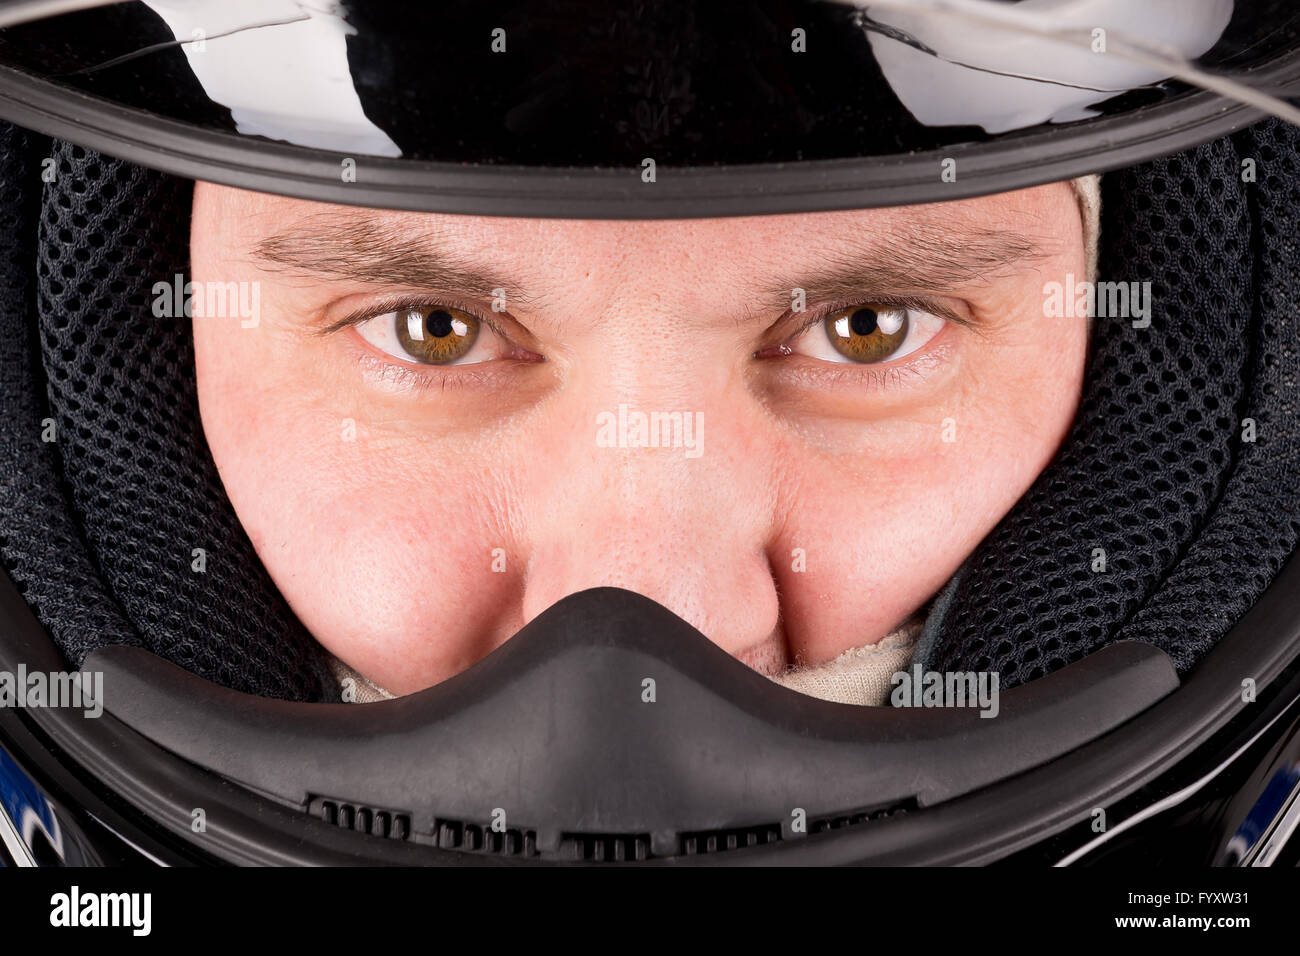 Racing driver close up posing with helmet Stock Photo